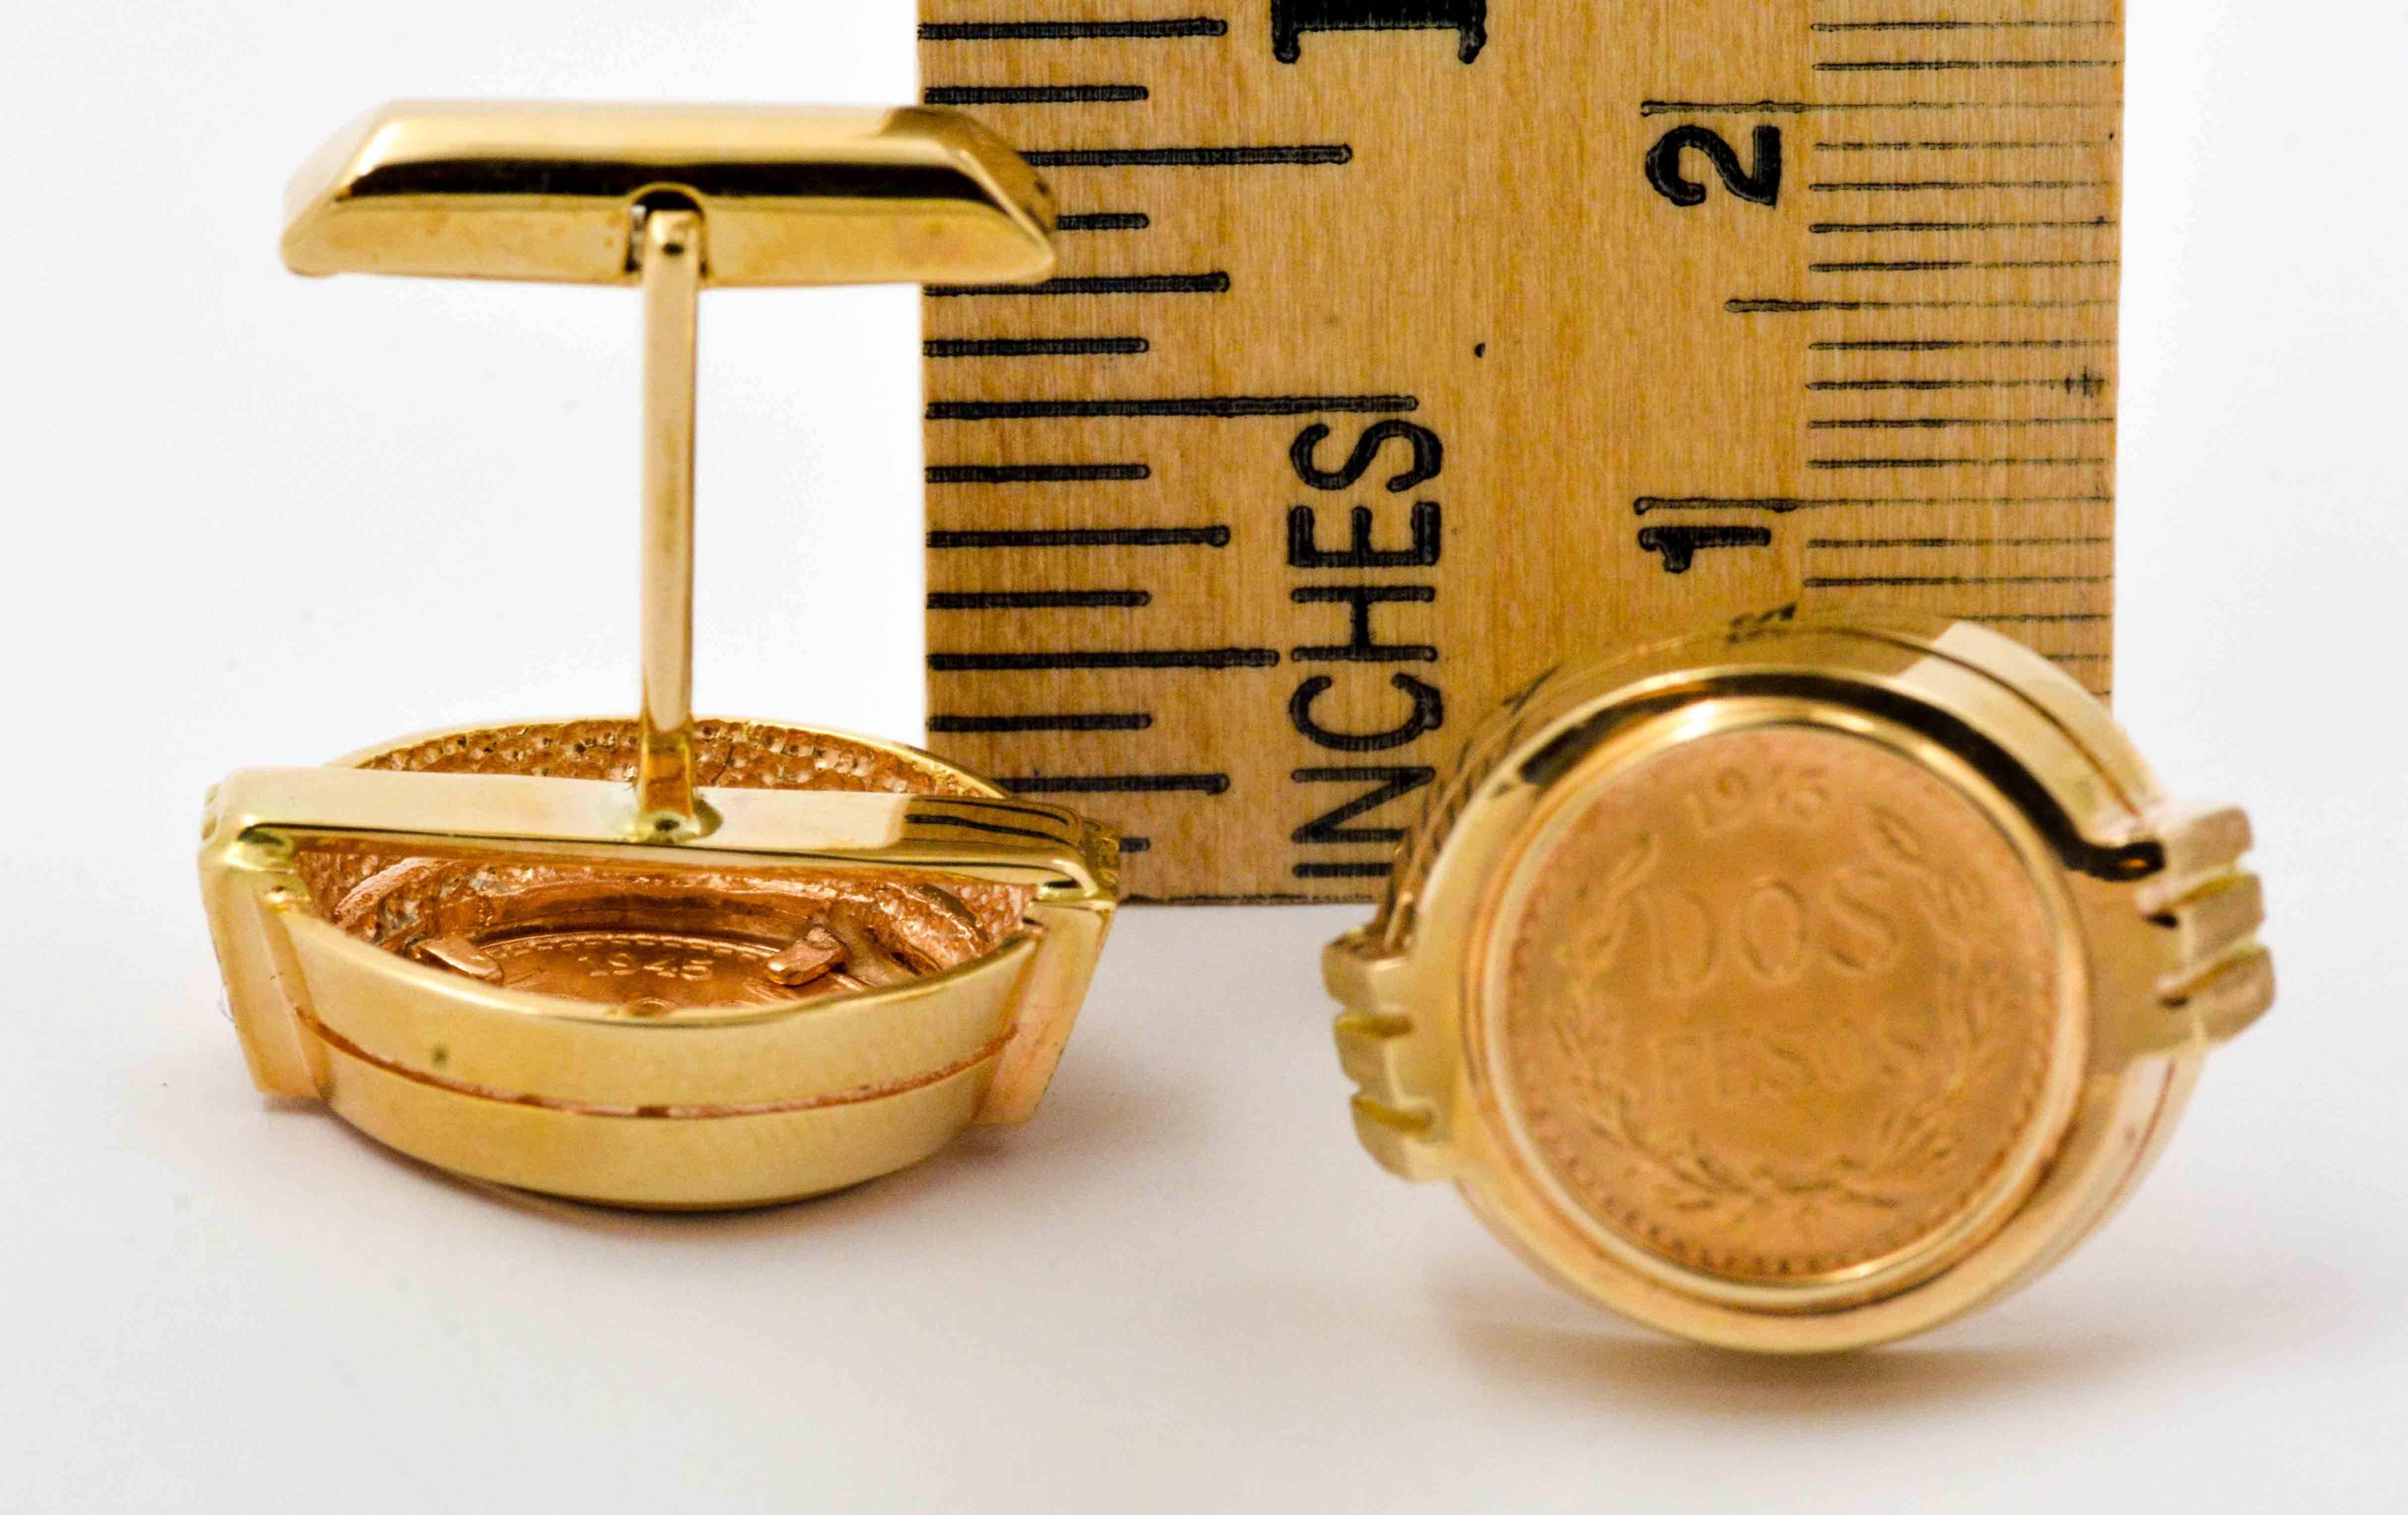 Dos Pesos gents cuff links crafted in 14kt yellow gold bezels and backs are sure to set you apart.  These cuff links are oriented with one Dos Pesos set heads up and the other Dos Pesos set tails up. The cuff links measure 17.16X21.35X7.59 MM with a